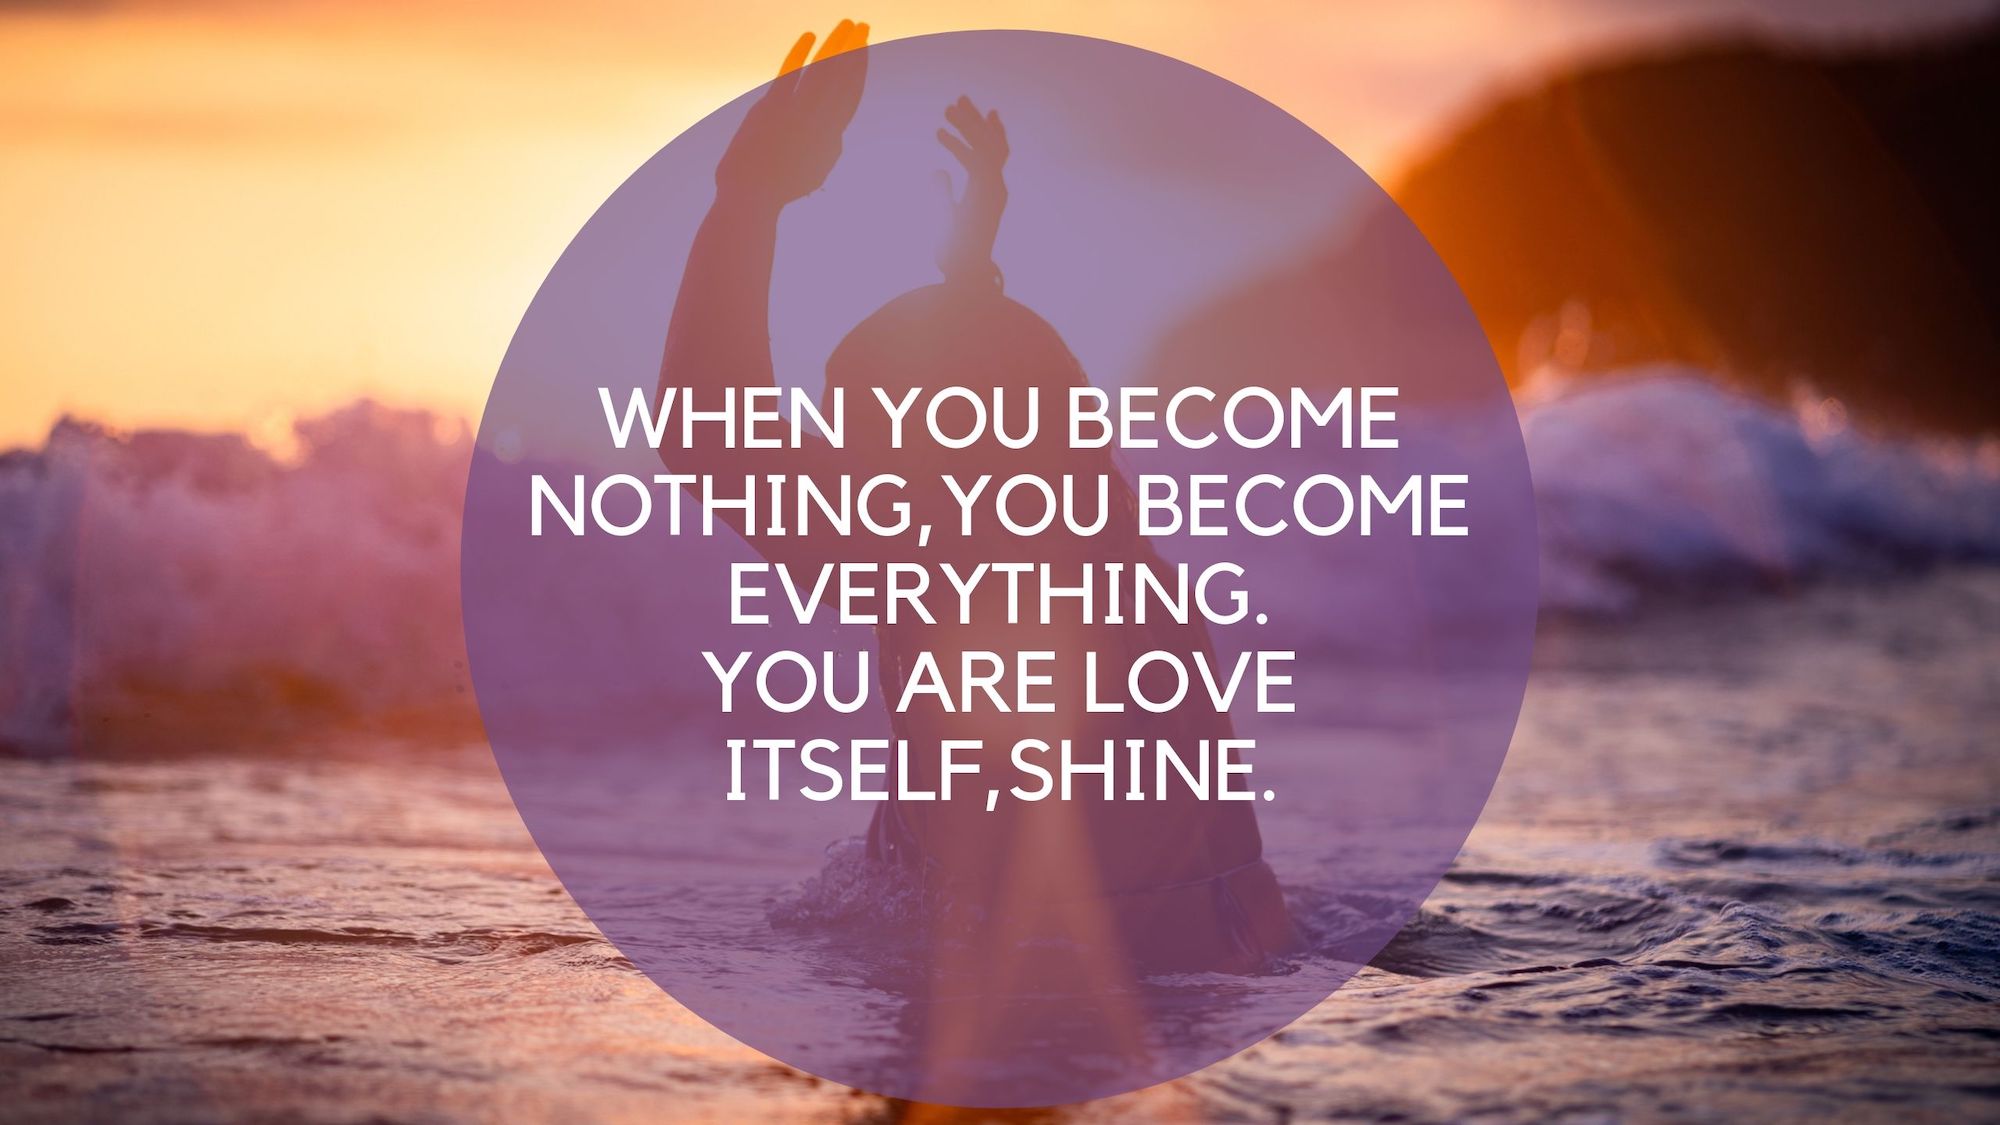 when you become nothing,you become everything.you sre love itself,shine.